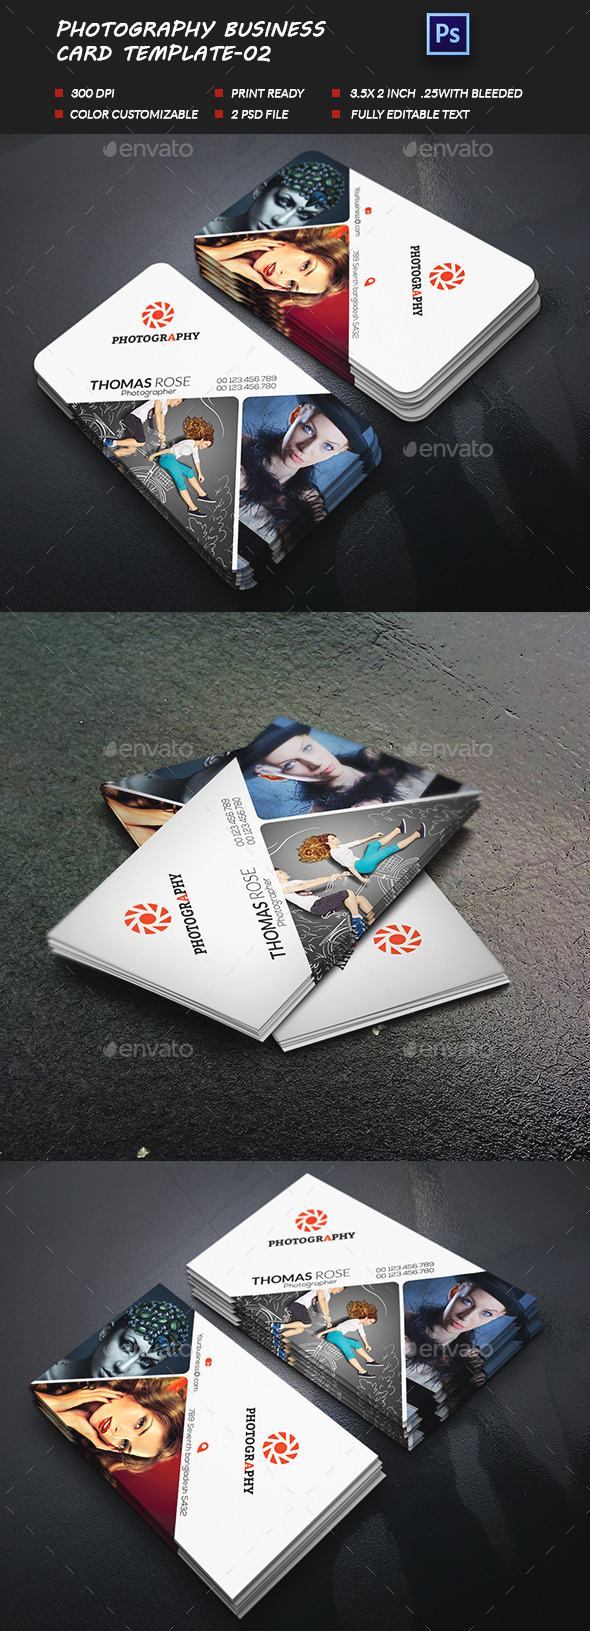 Photography Business Card-02